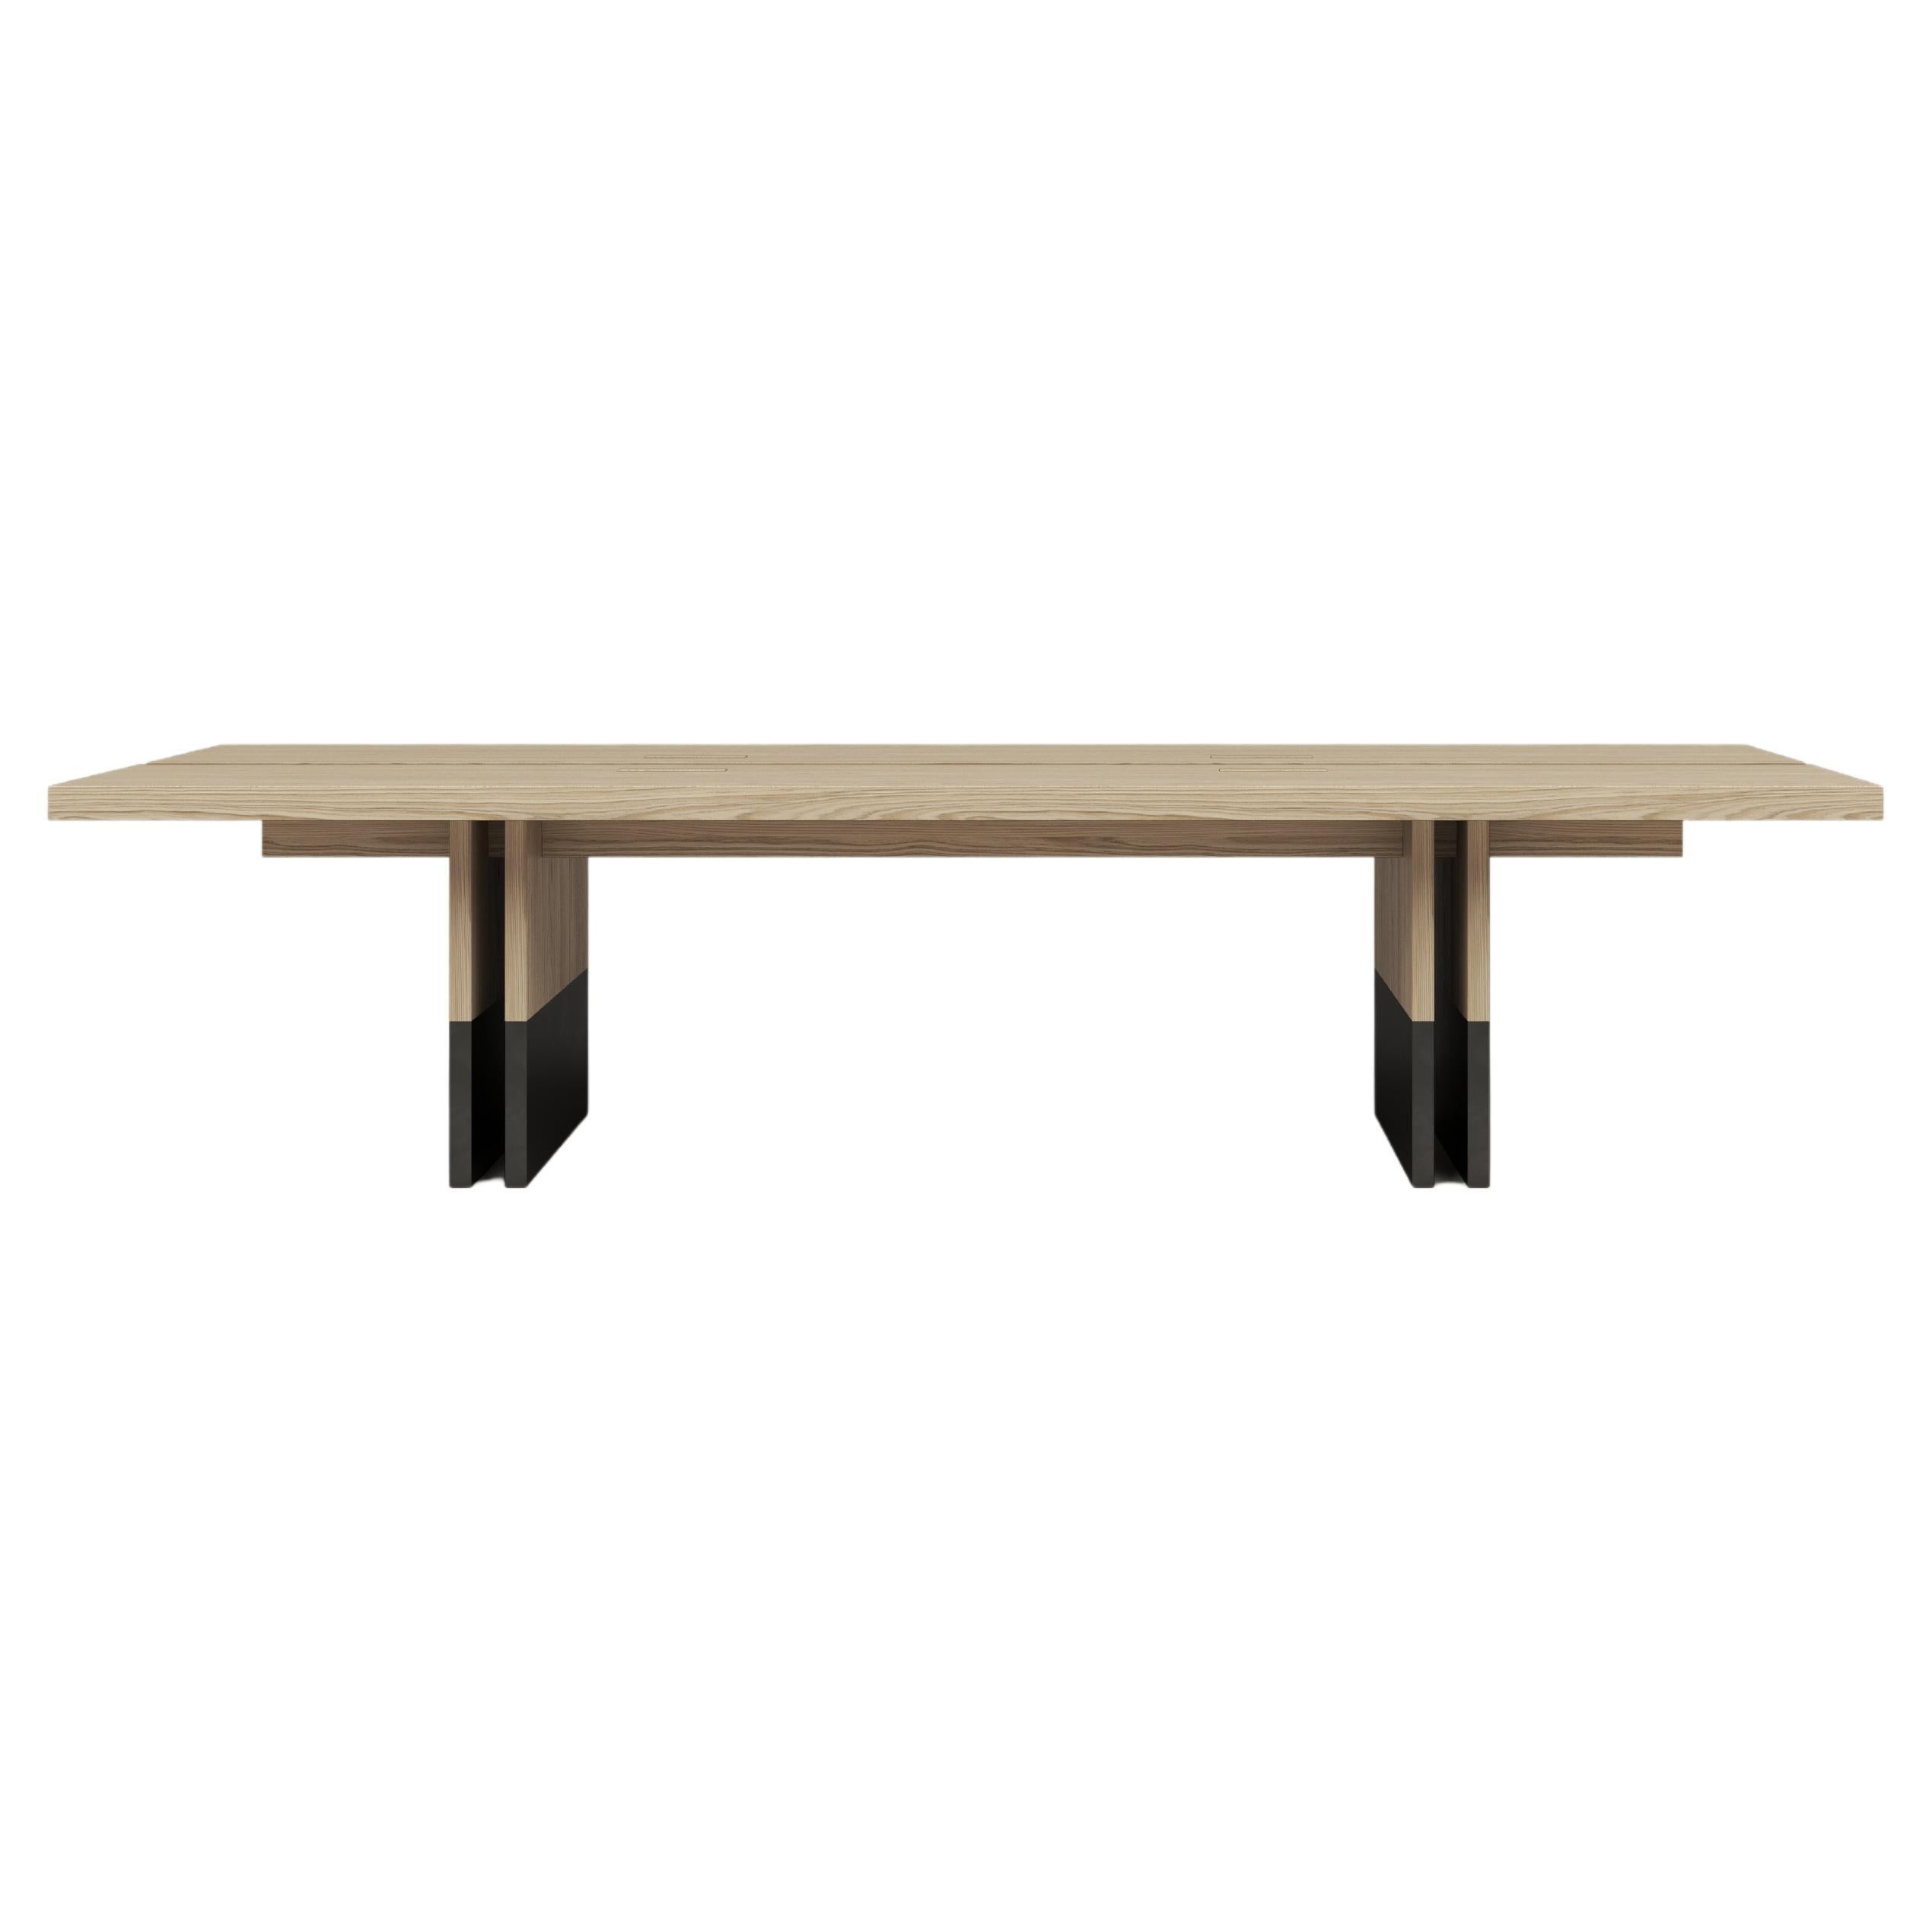 Rift Wood and Metal Dining Table by Andy Kerstens